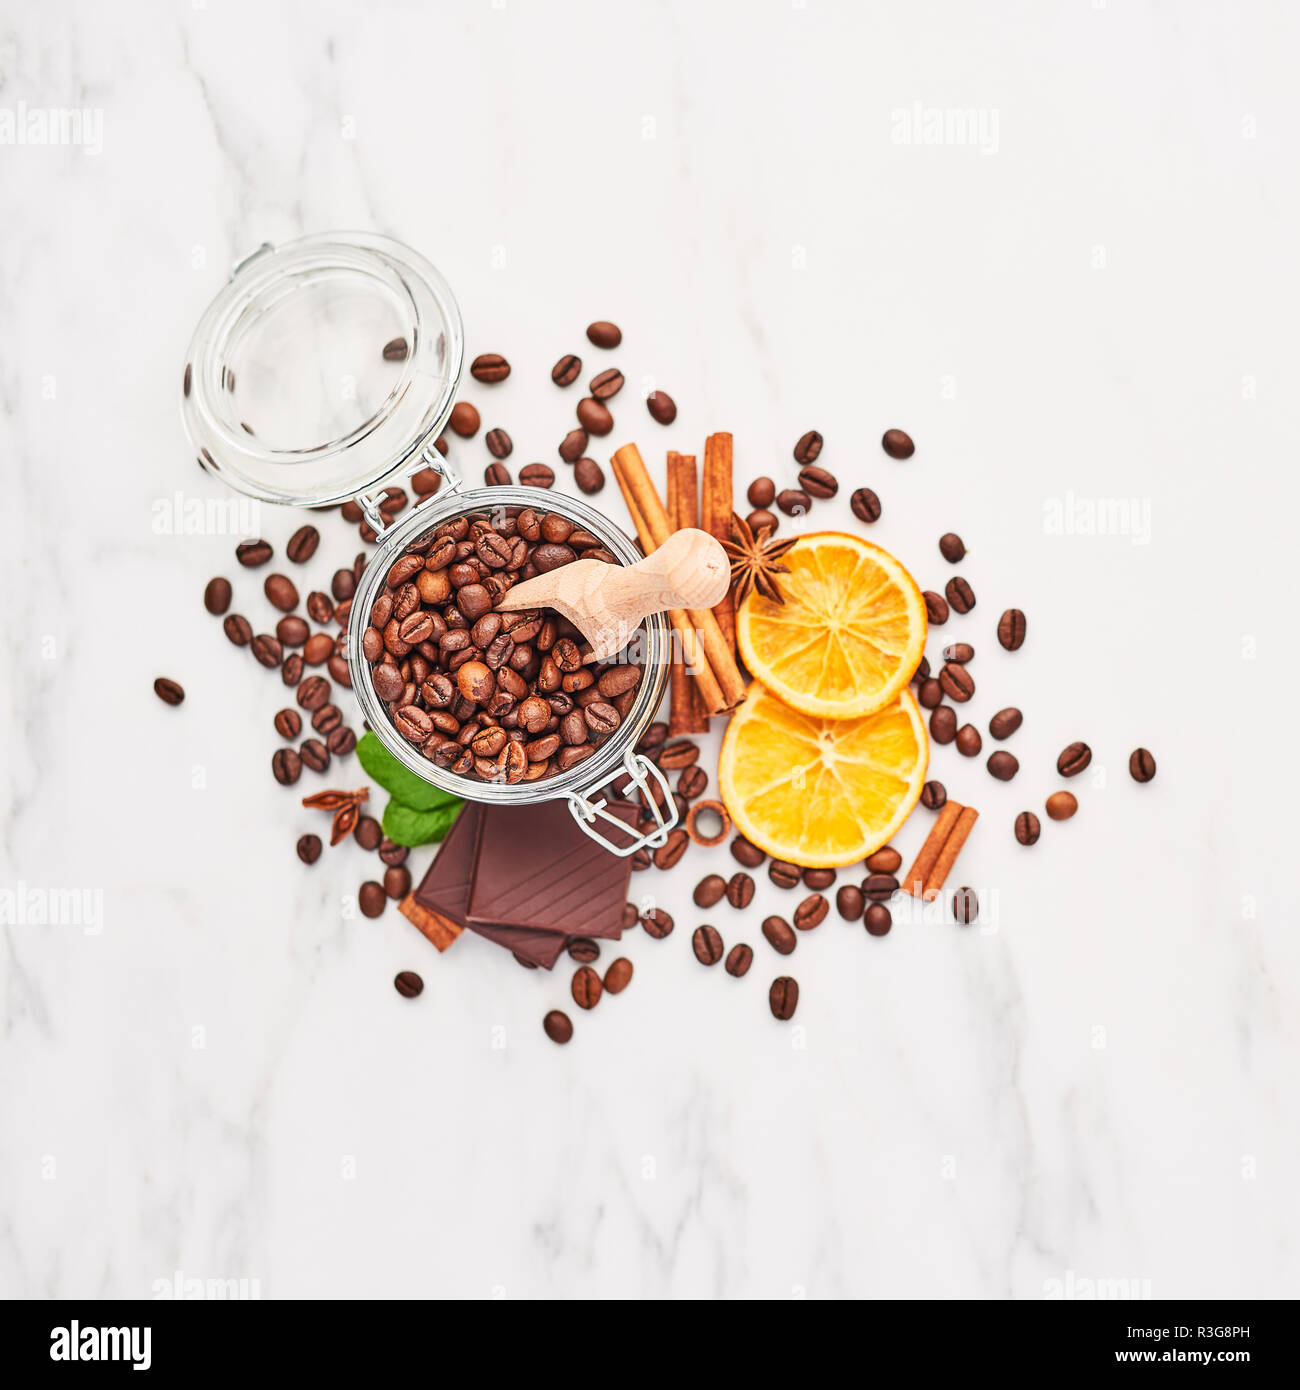 Coffee in a glass jar with beans, chocolate, dried oranges, anis and cinnamon sticks on white marble background. Concept of coffee with different spic Stock Photo